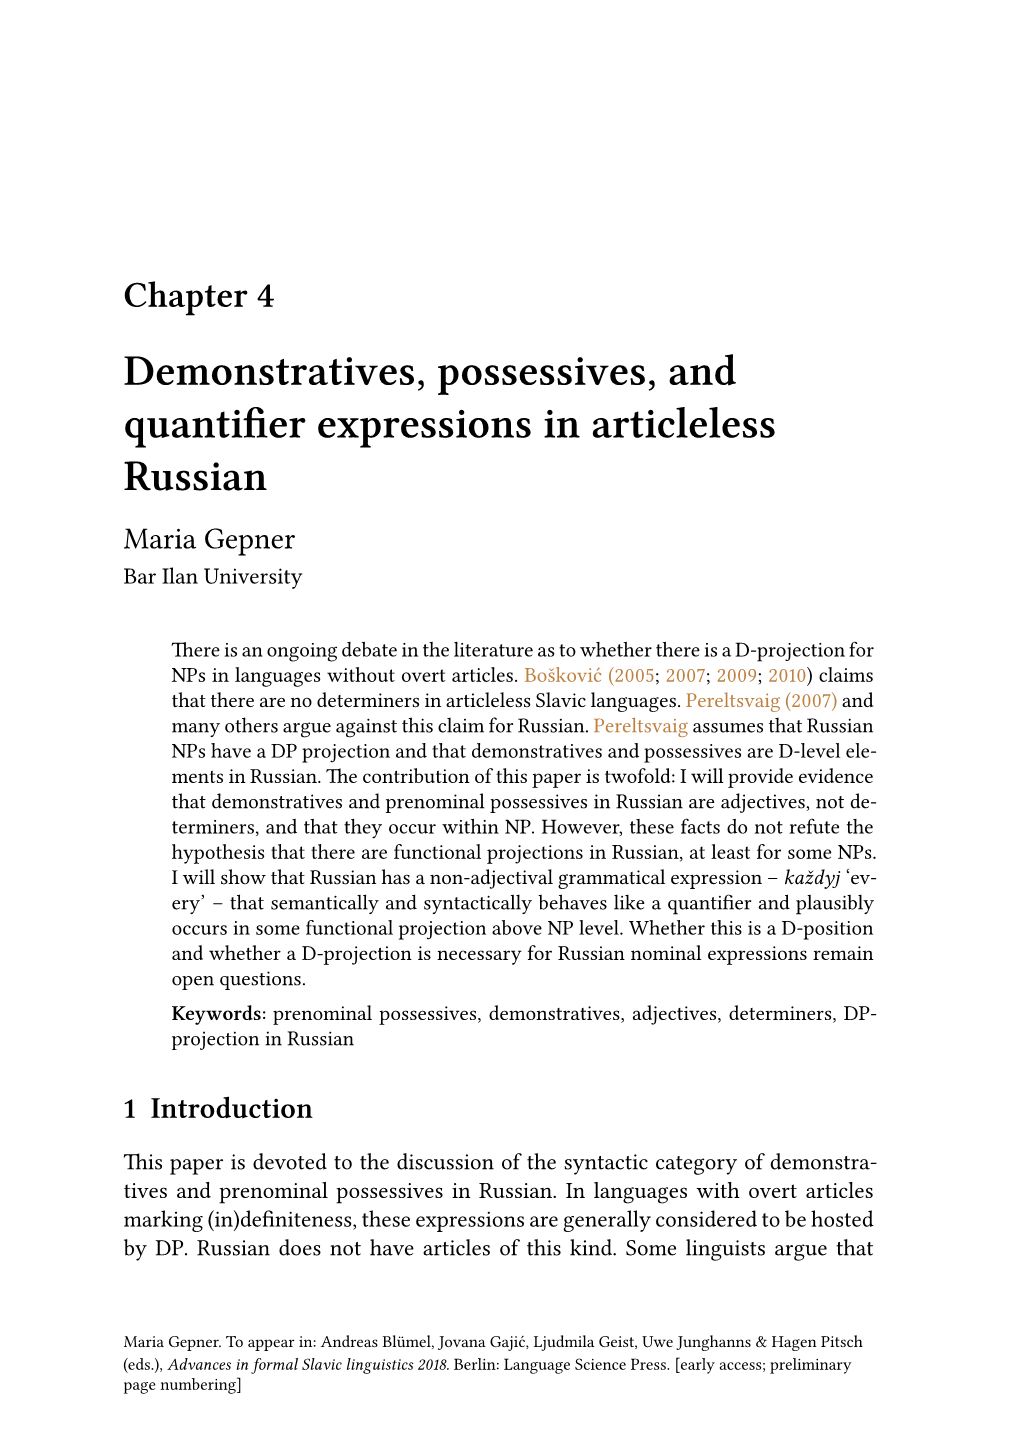 Demonstratives, Possessives, and Quantifier Expressions in Articleless Russian Maria Gepner Bar Ilan University